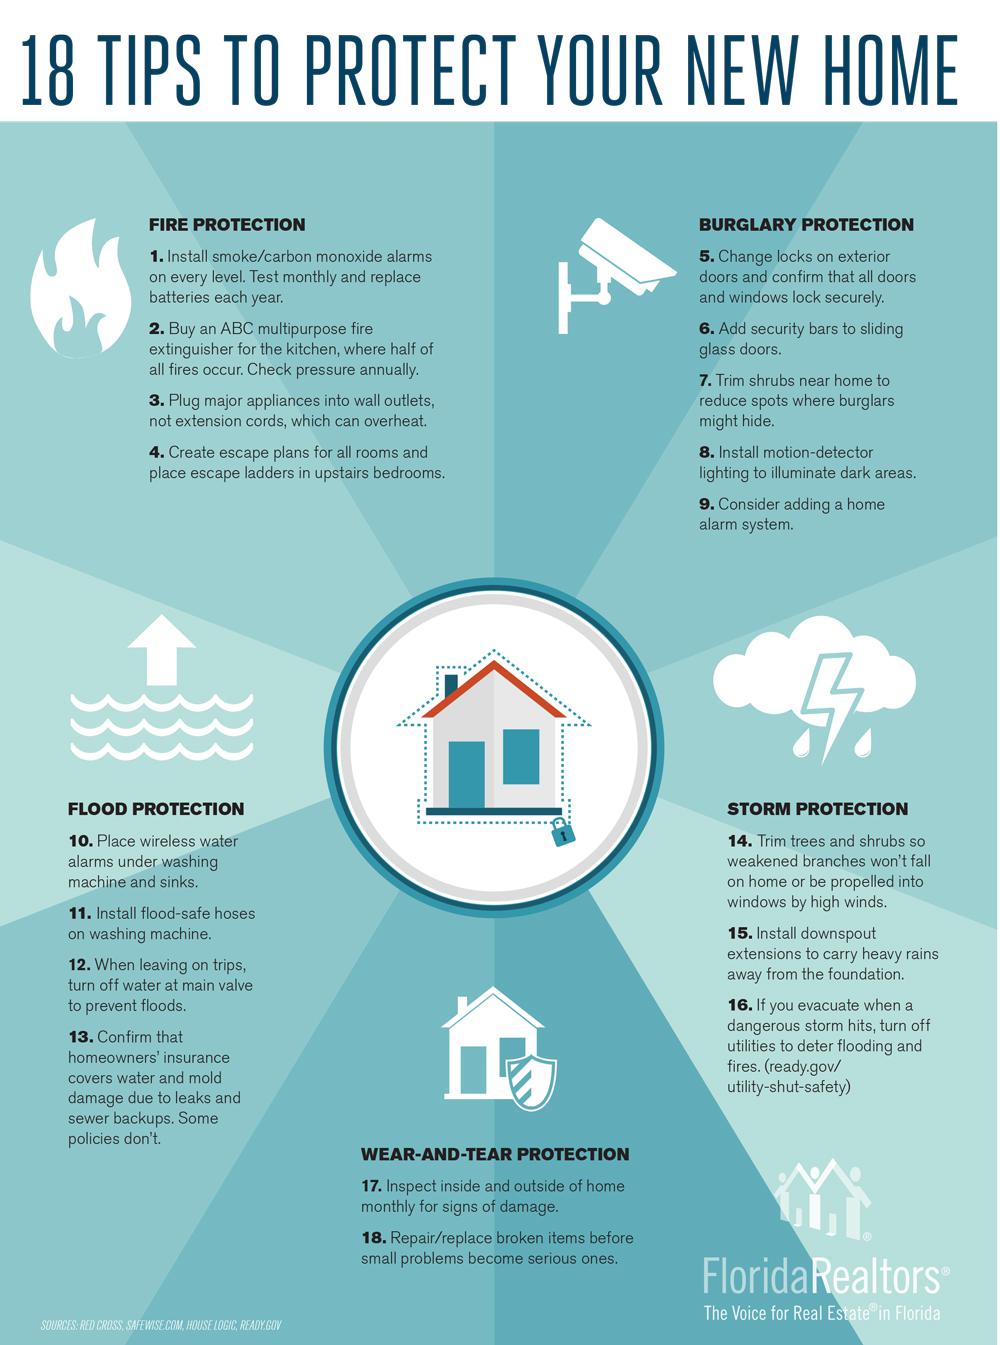 18 TIPS TO PROTECT YOUR NEW HOME